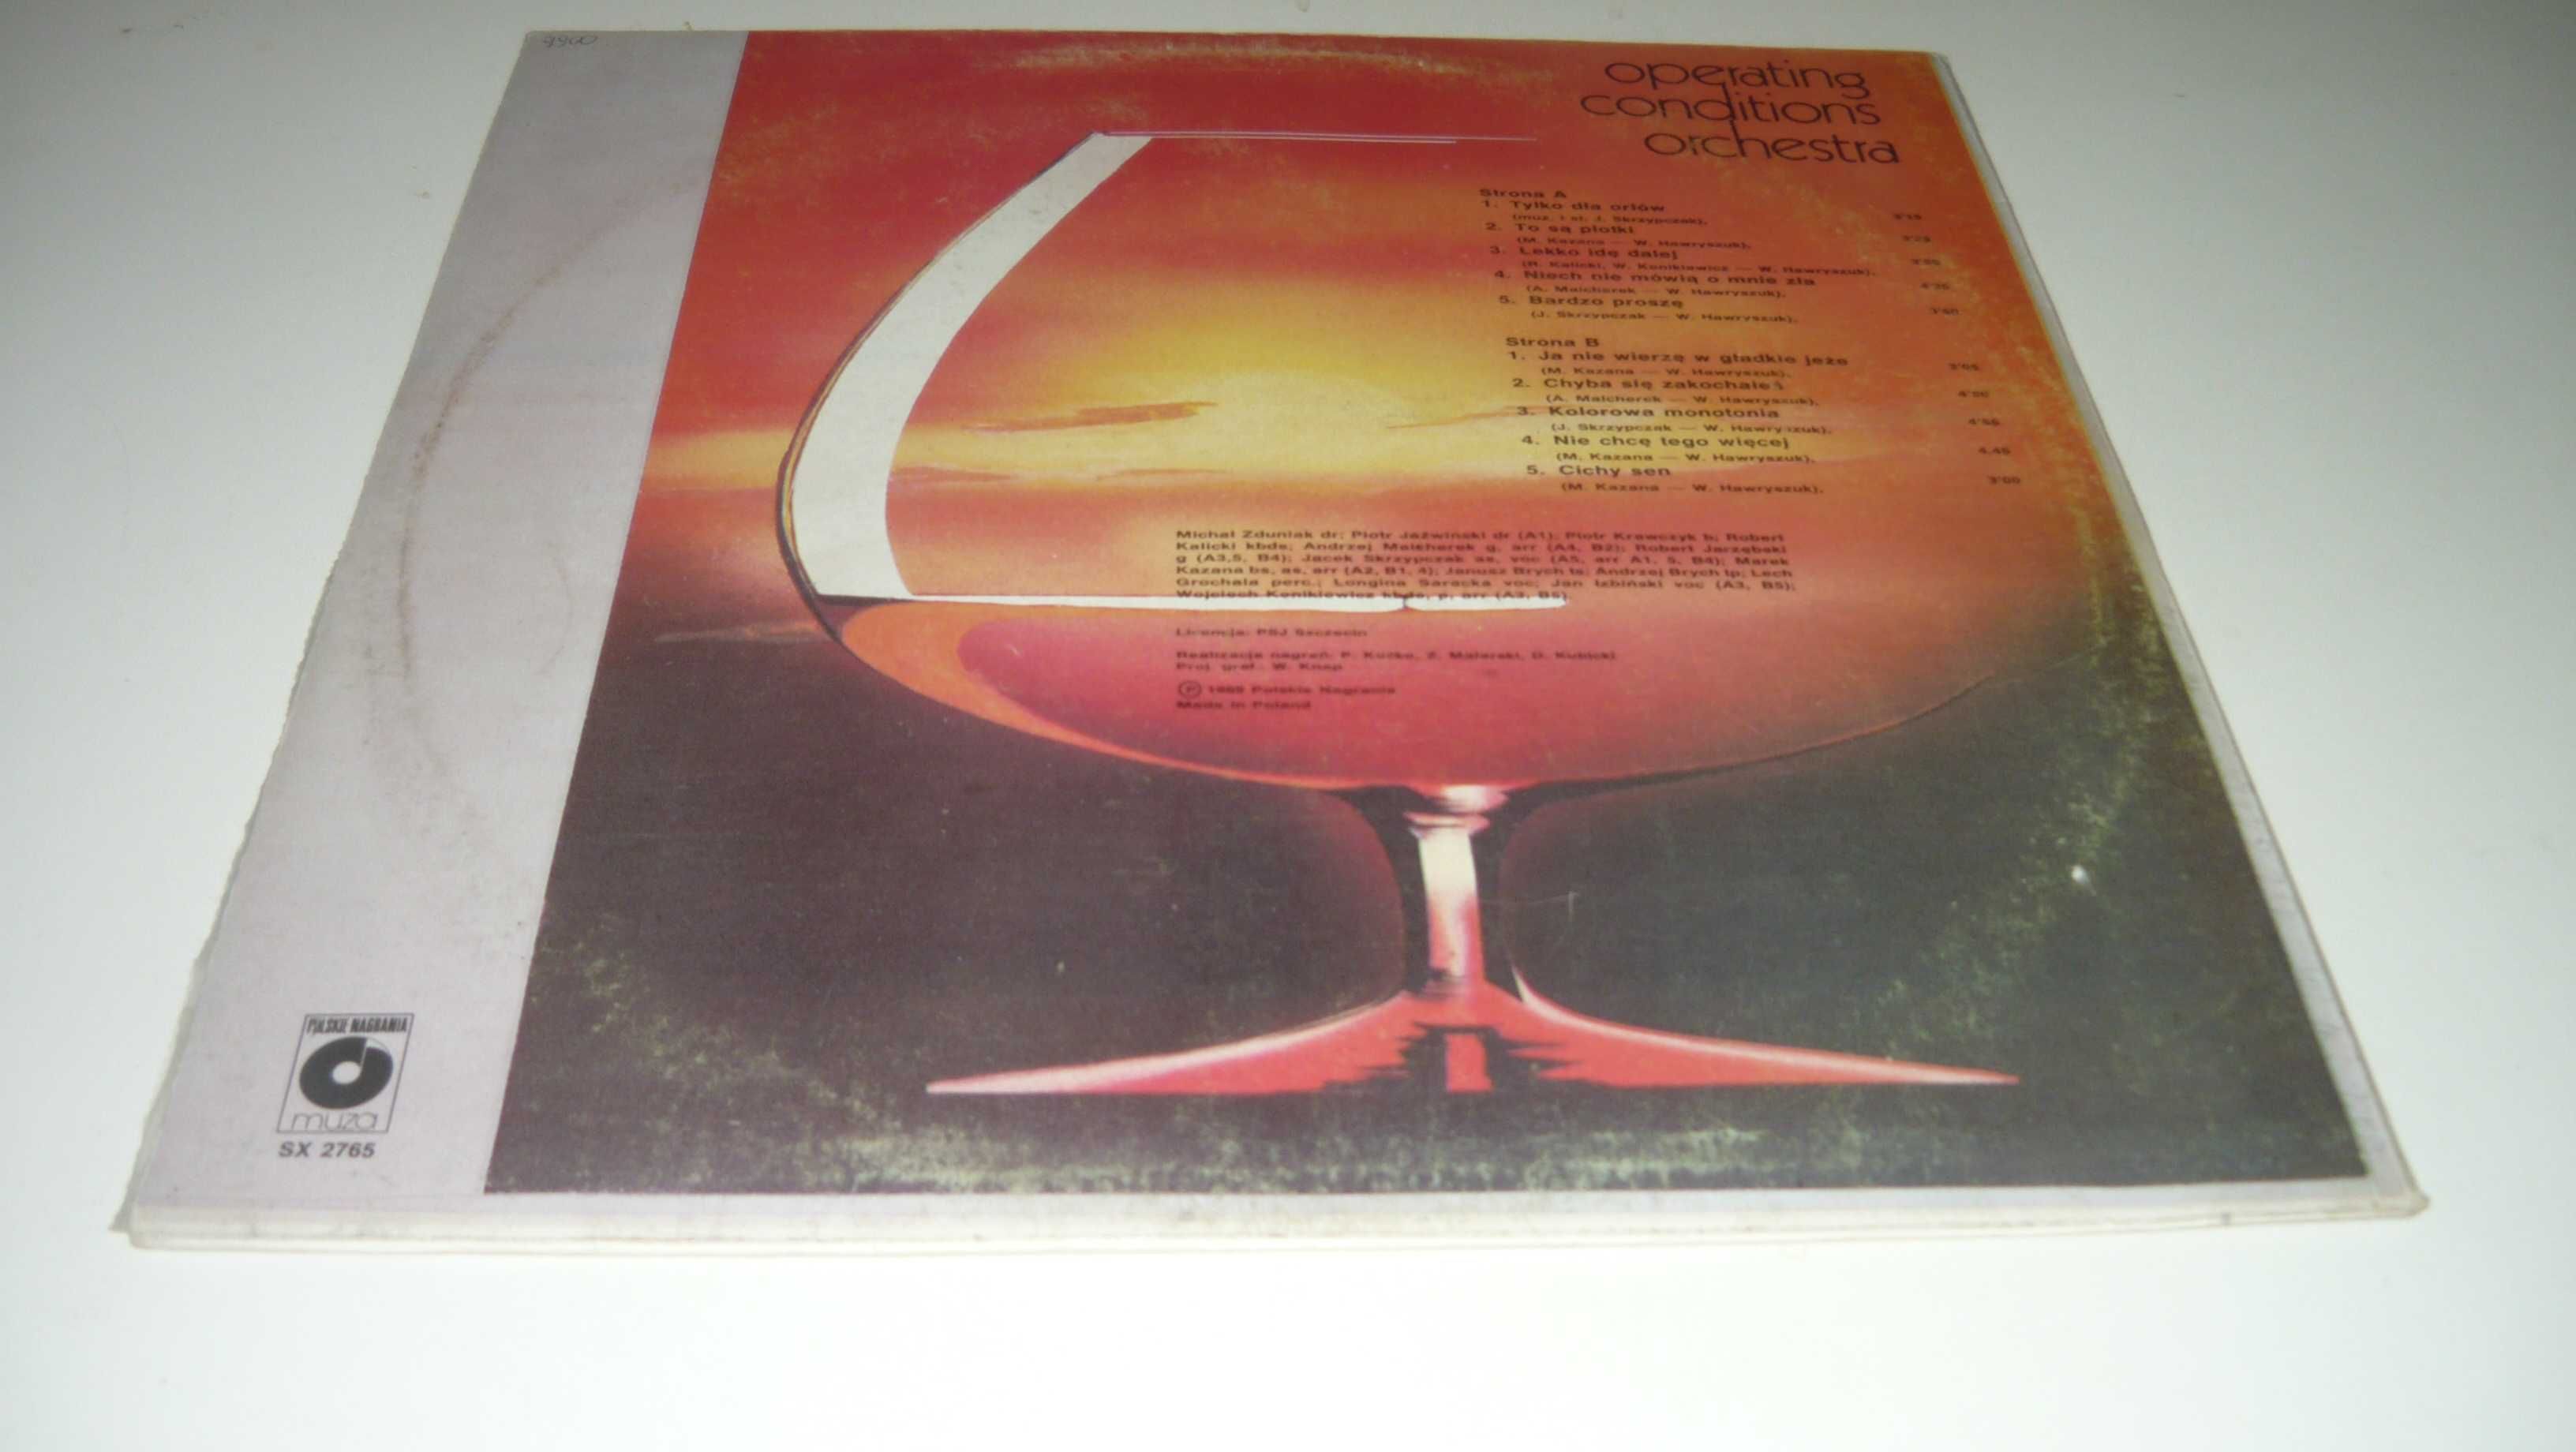 Operating Conditions Orchestra LP